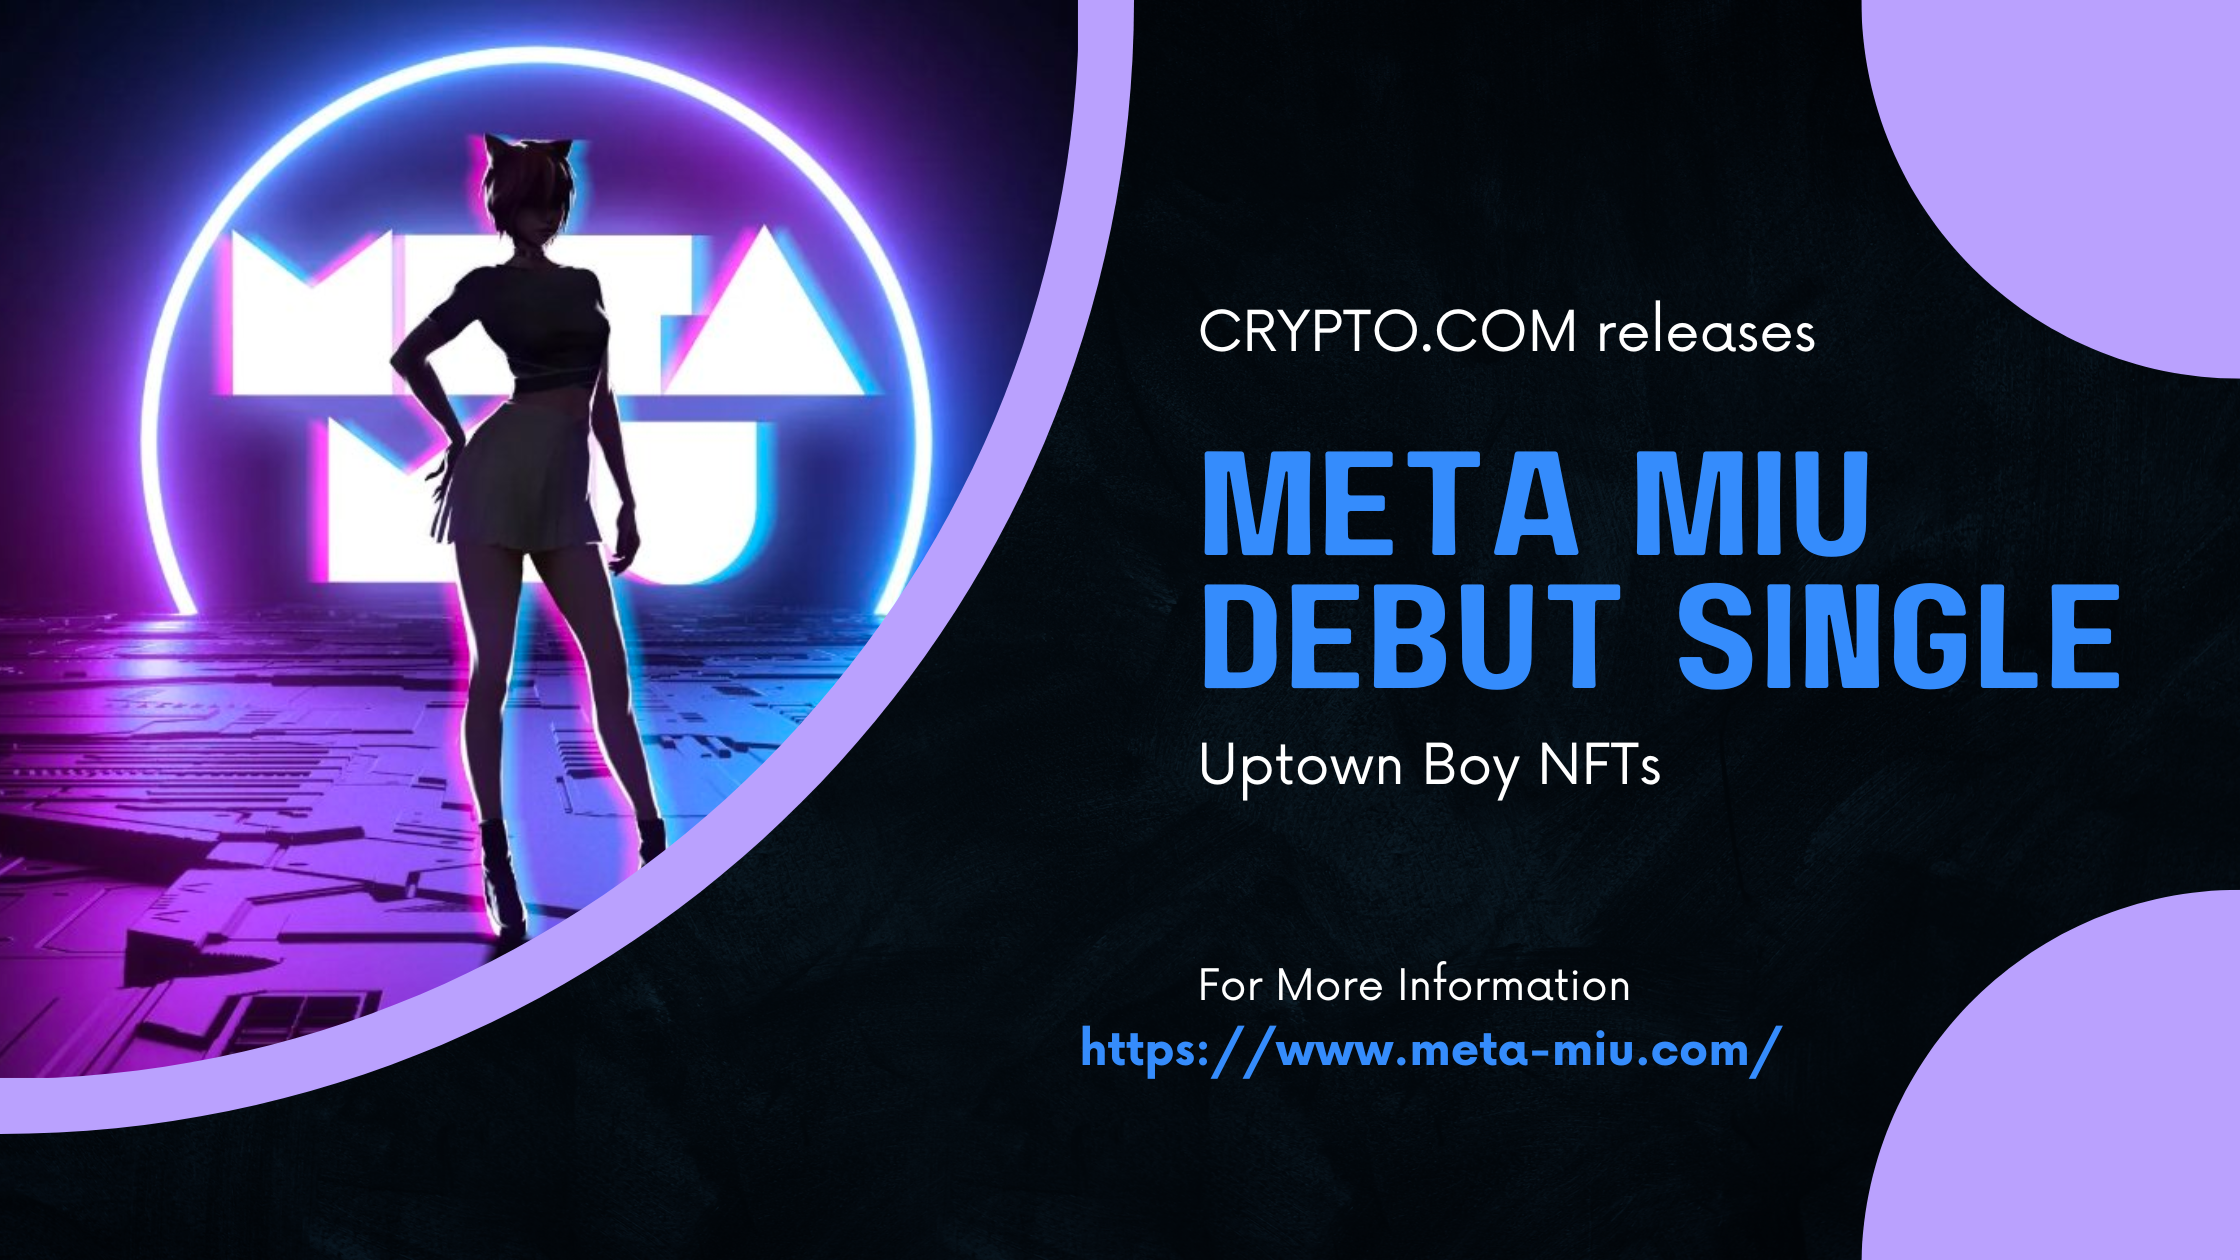 Crypto.com and Fantagio Collaborate to Launch Debut Single "Uptown Boy" By Meta Miu